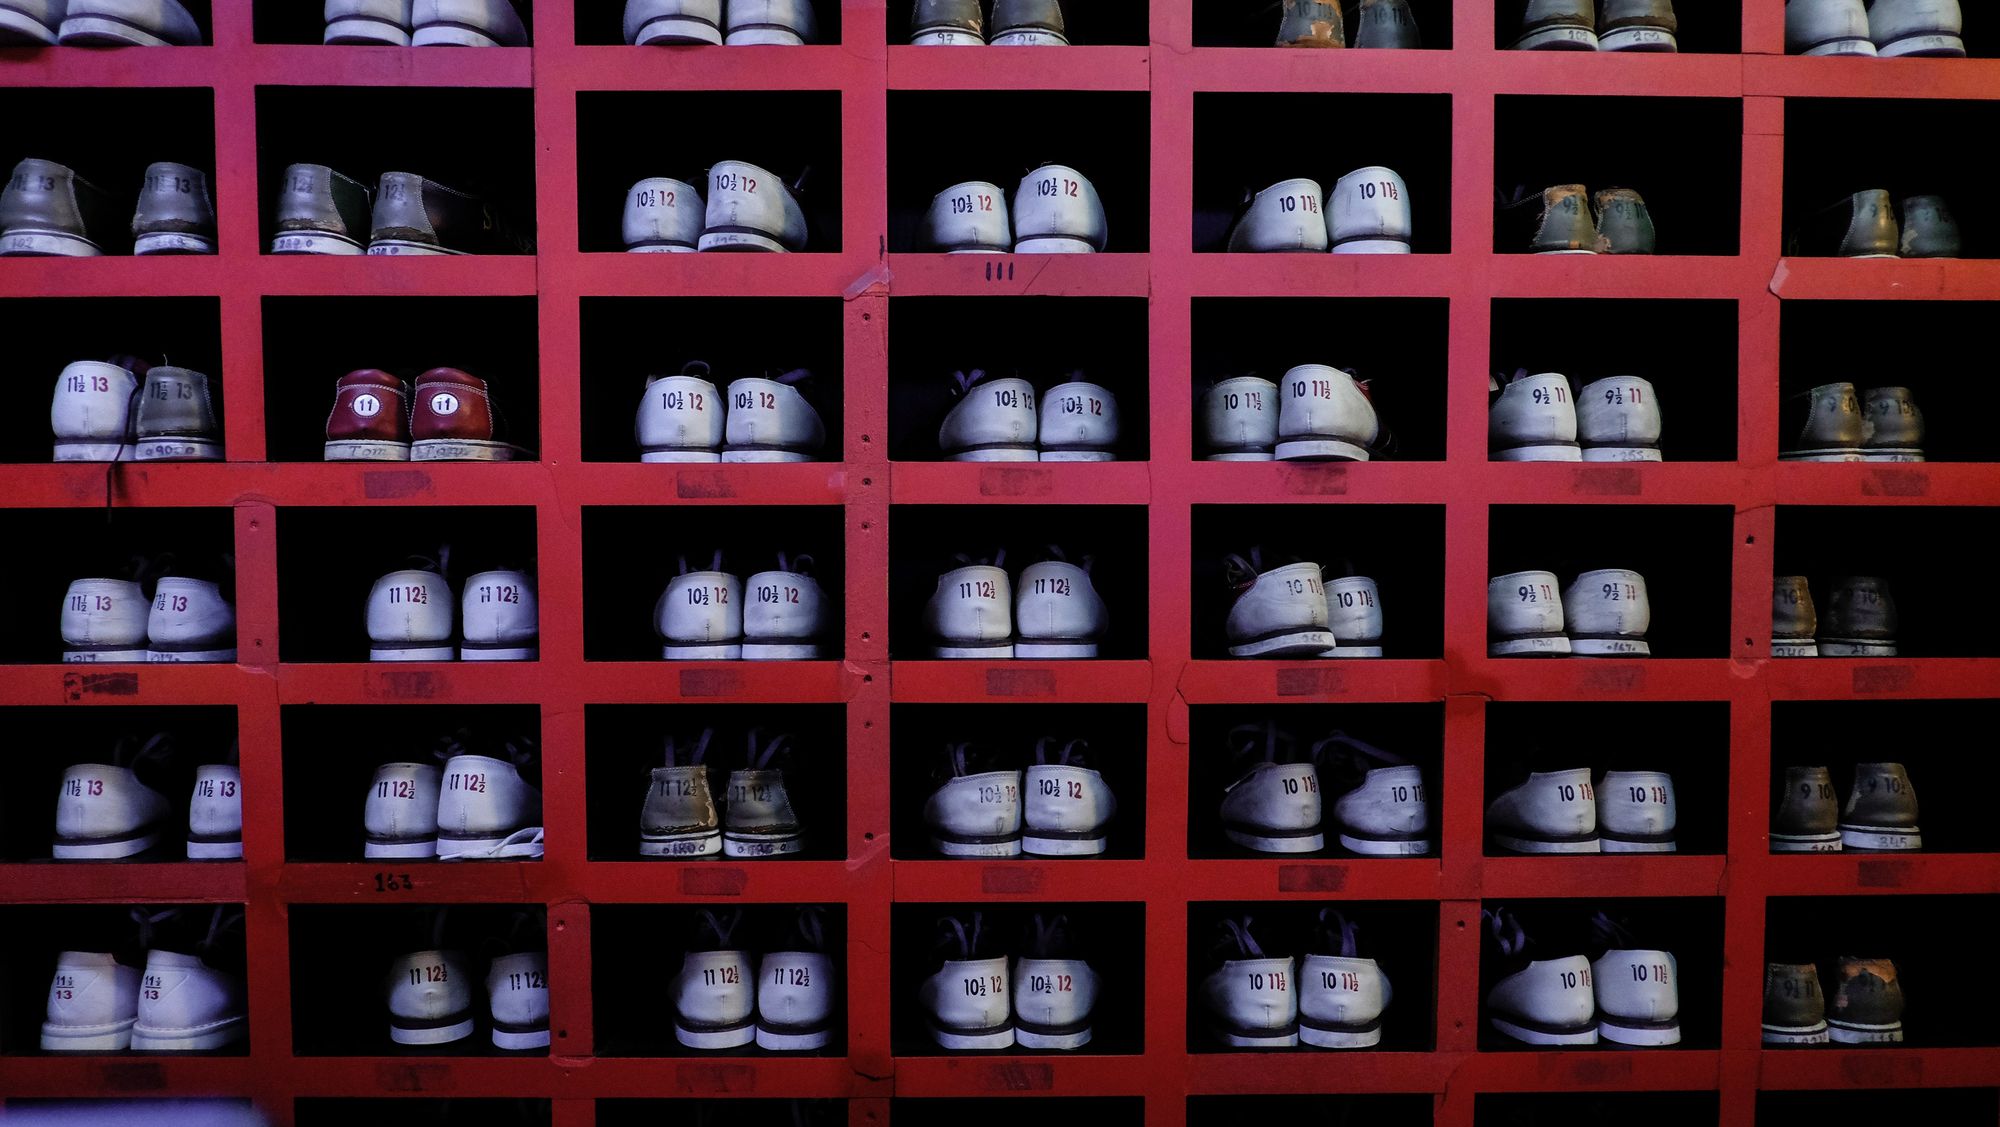 Bowling shoes in individual cubbyholes